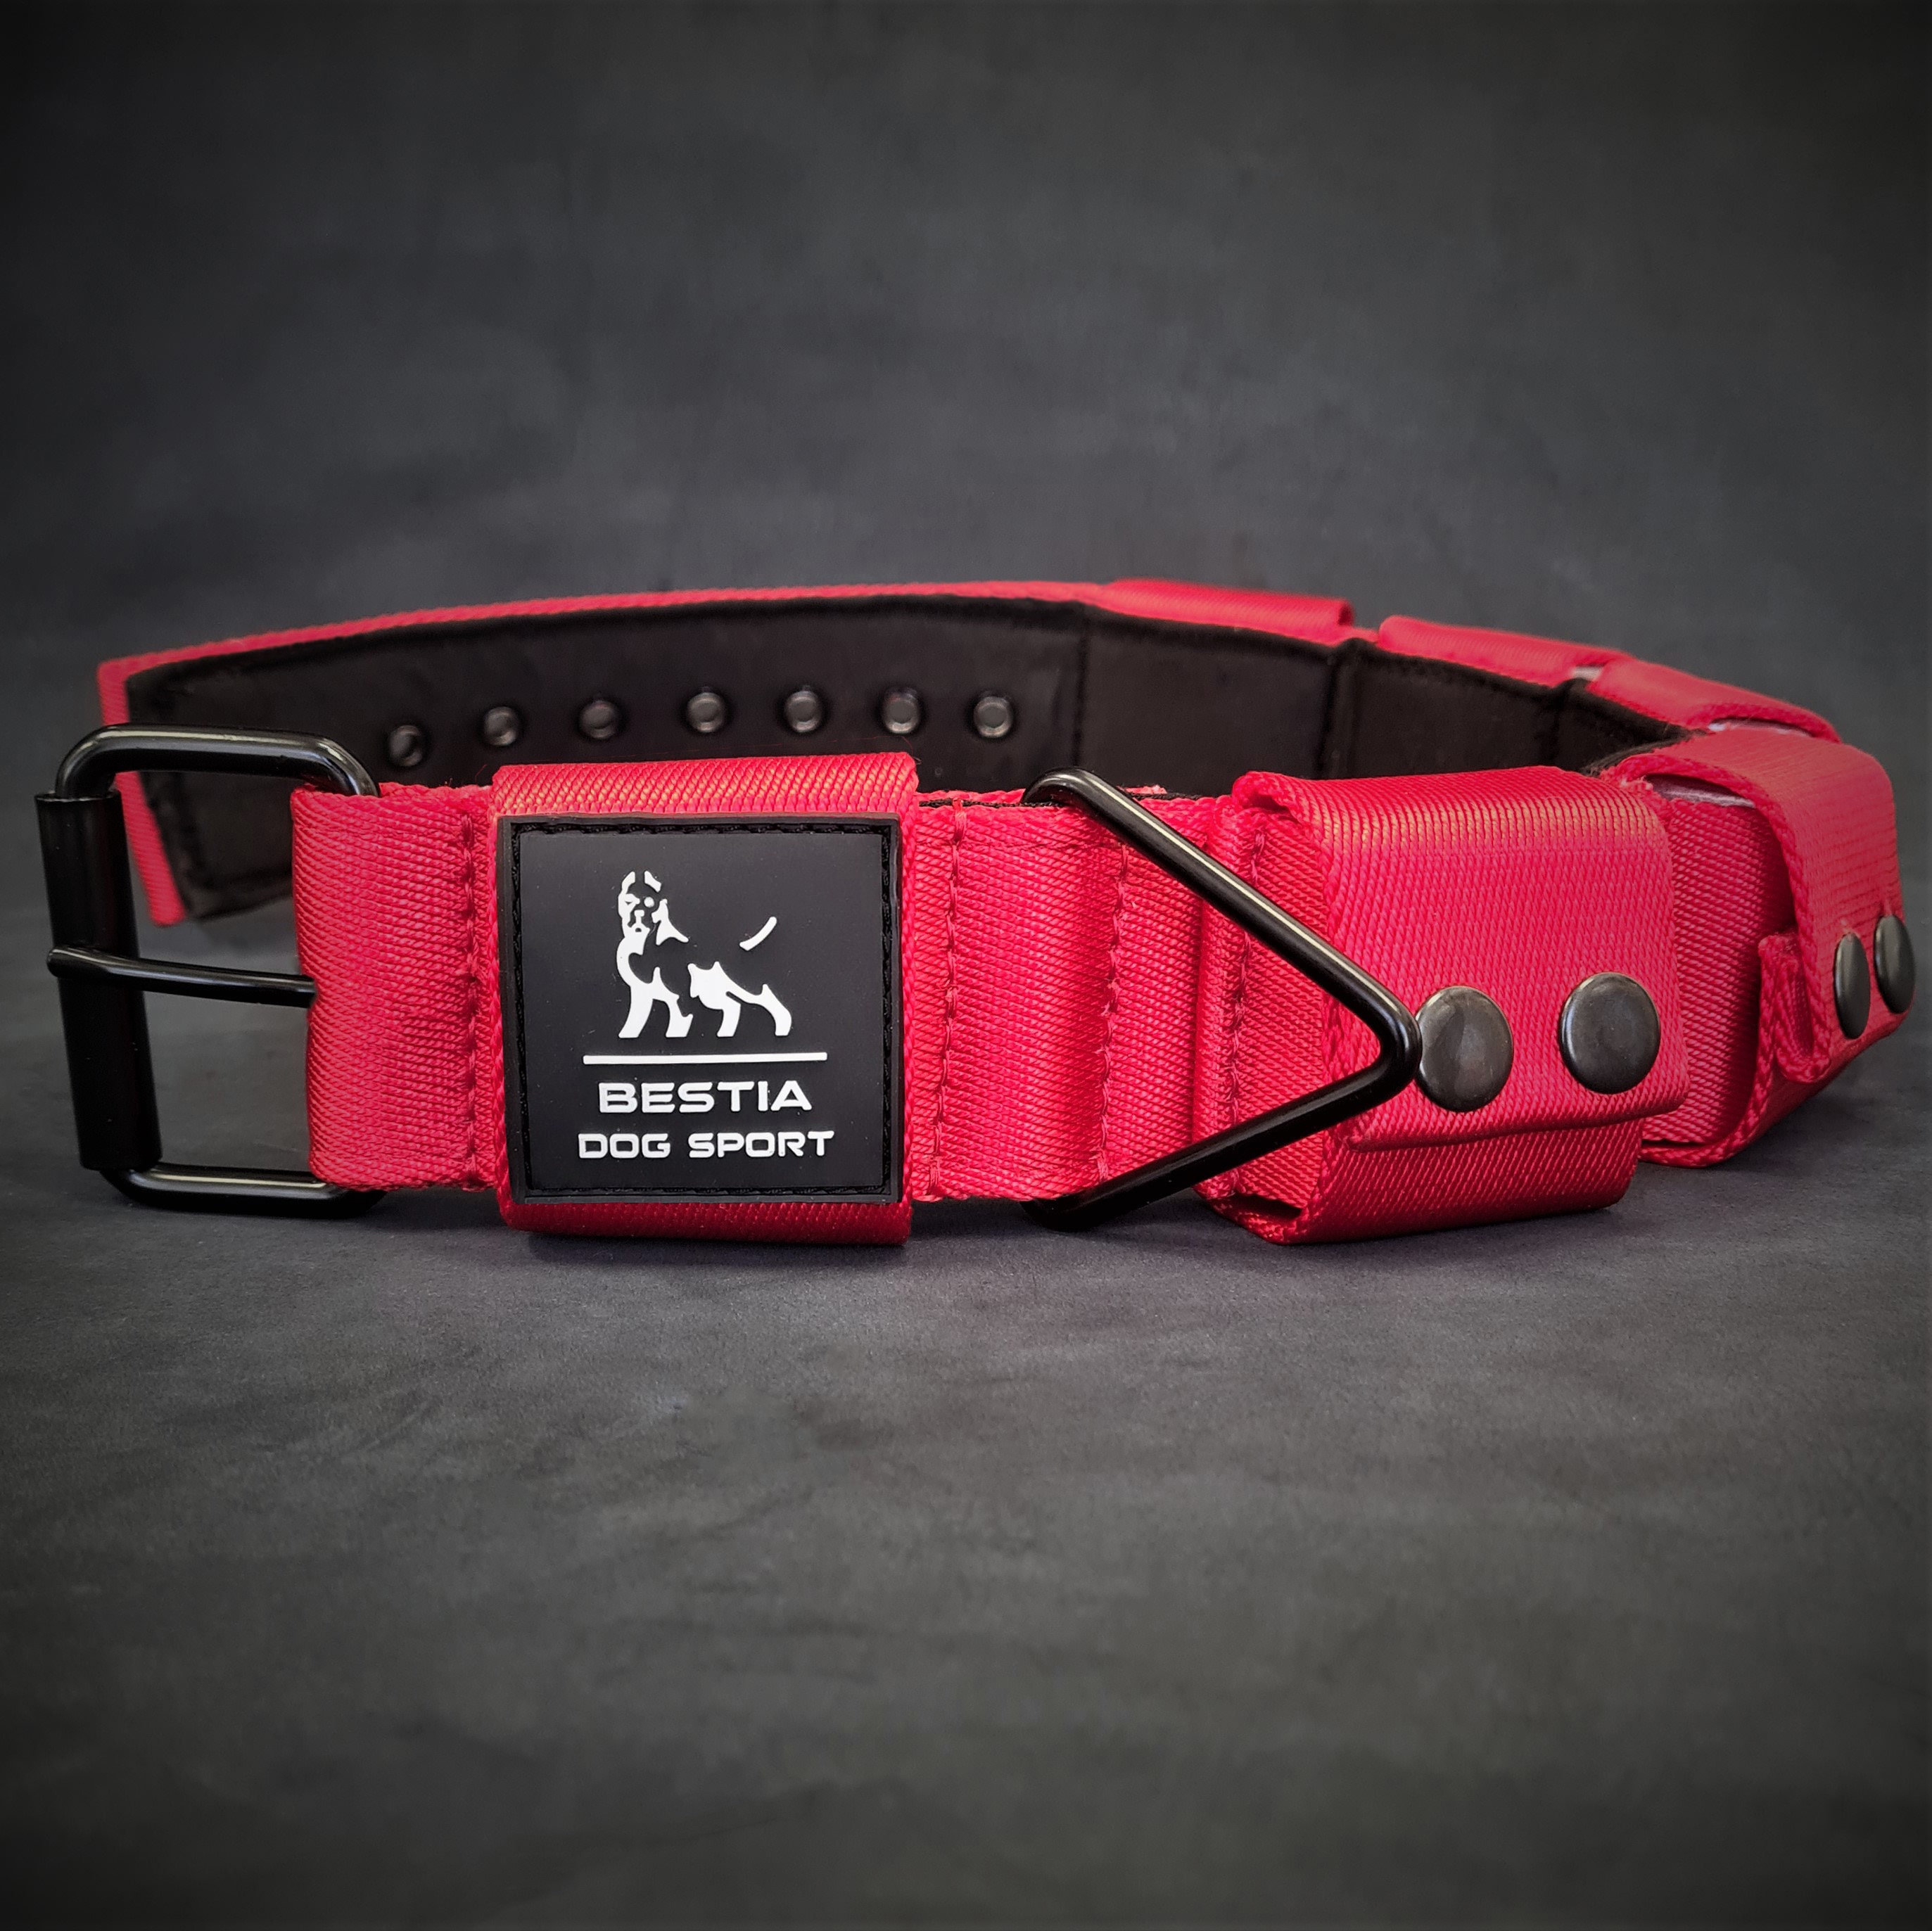 Weighted dog training collar. Large breeds. 5 lbs total. removable weights  - Bestia Collars